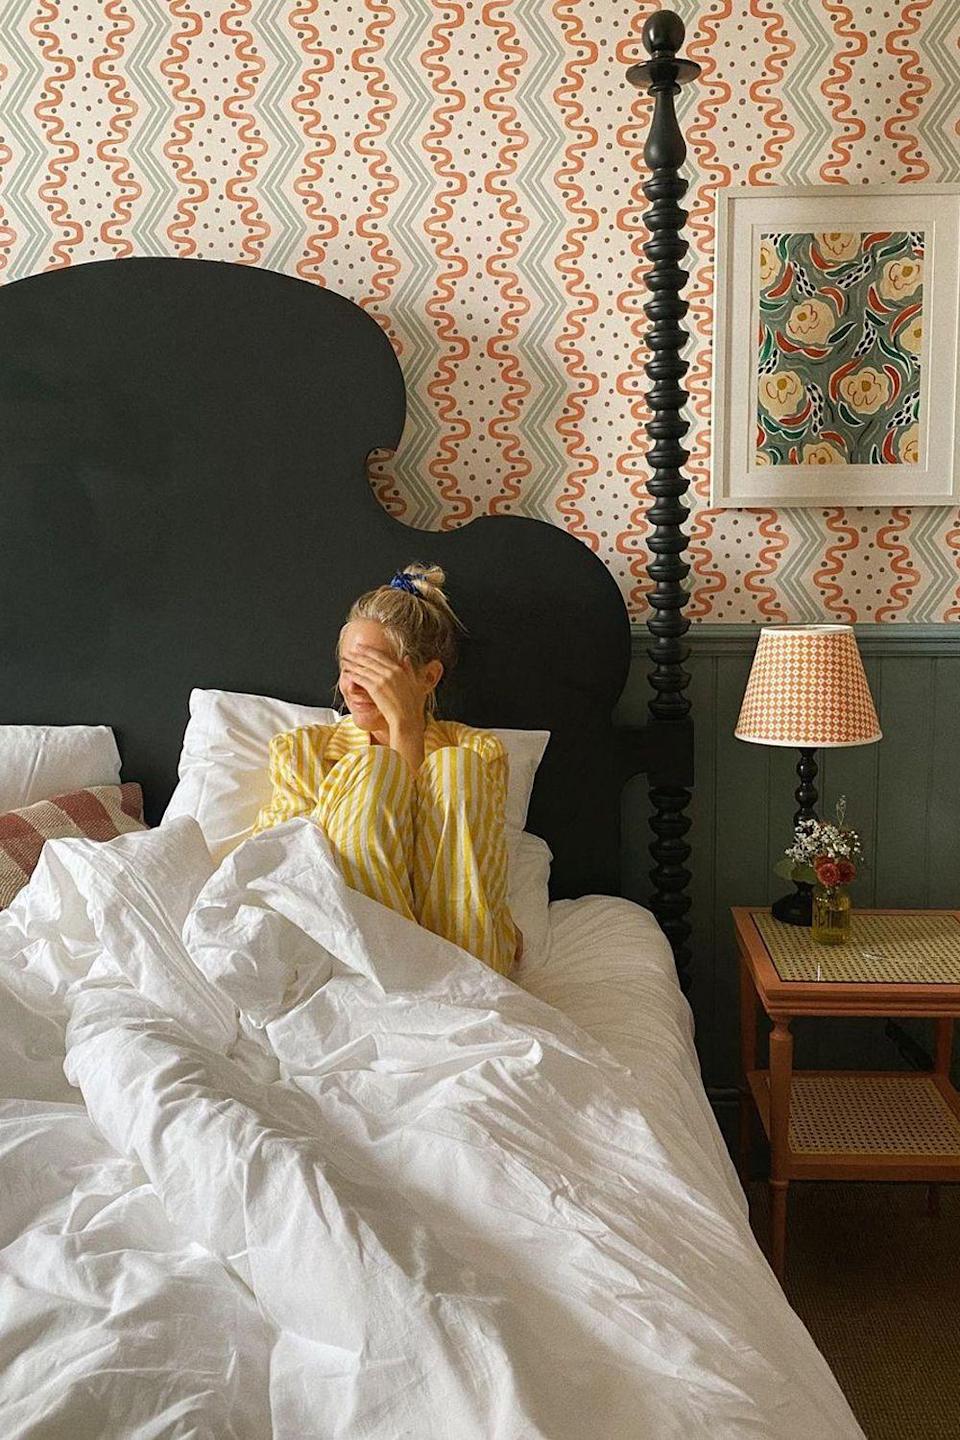 Wallpaper Are Having a Moment—This Is How to Find the Perfect One